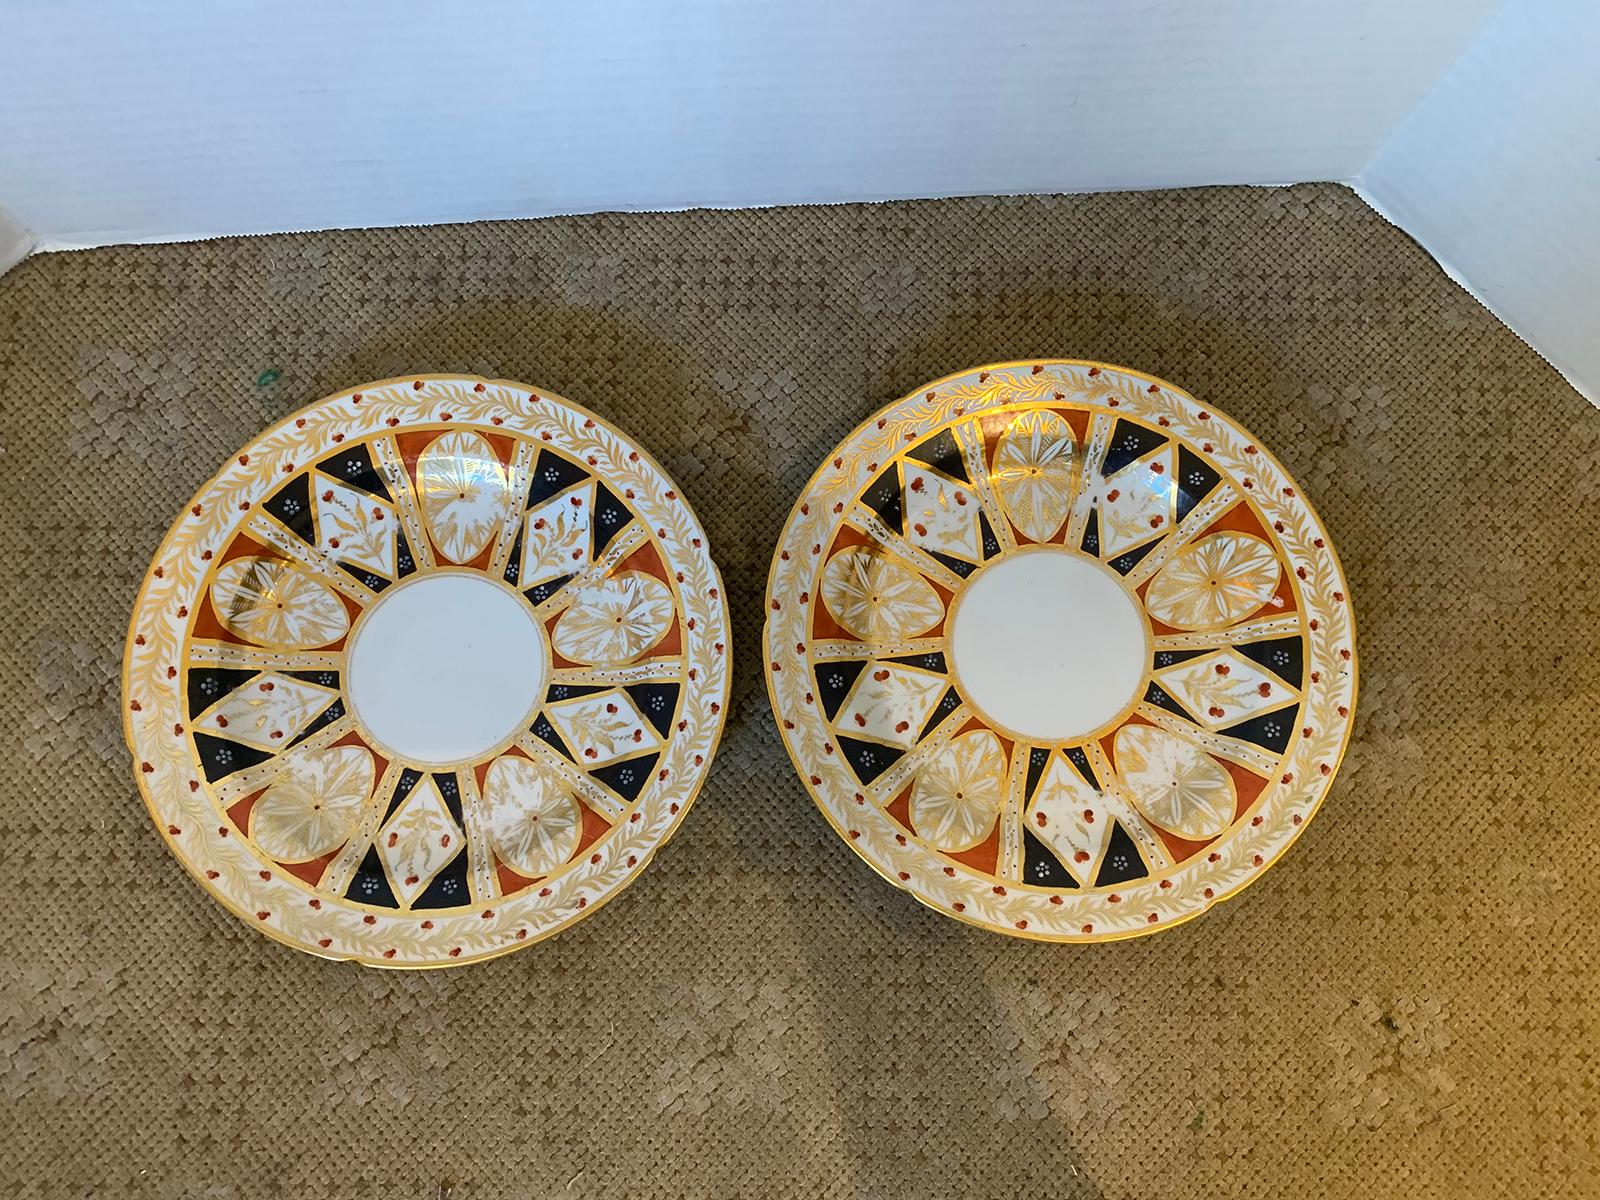 Pair of 19th century circa 1810 English Coalport round porcelain plates with elaborate gilt detailing and old sticker.